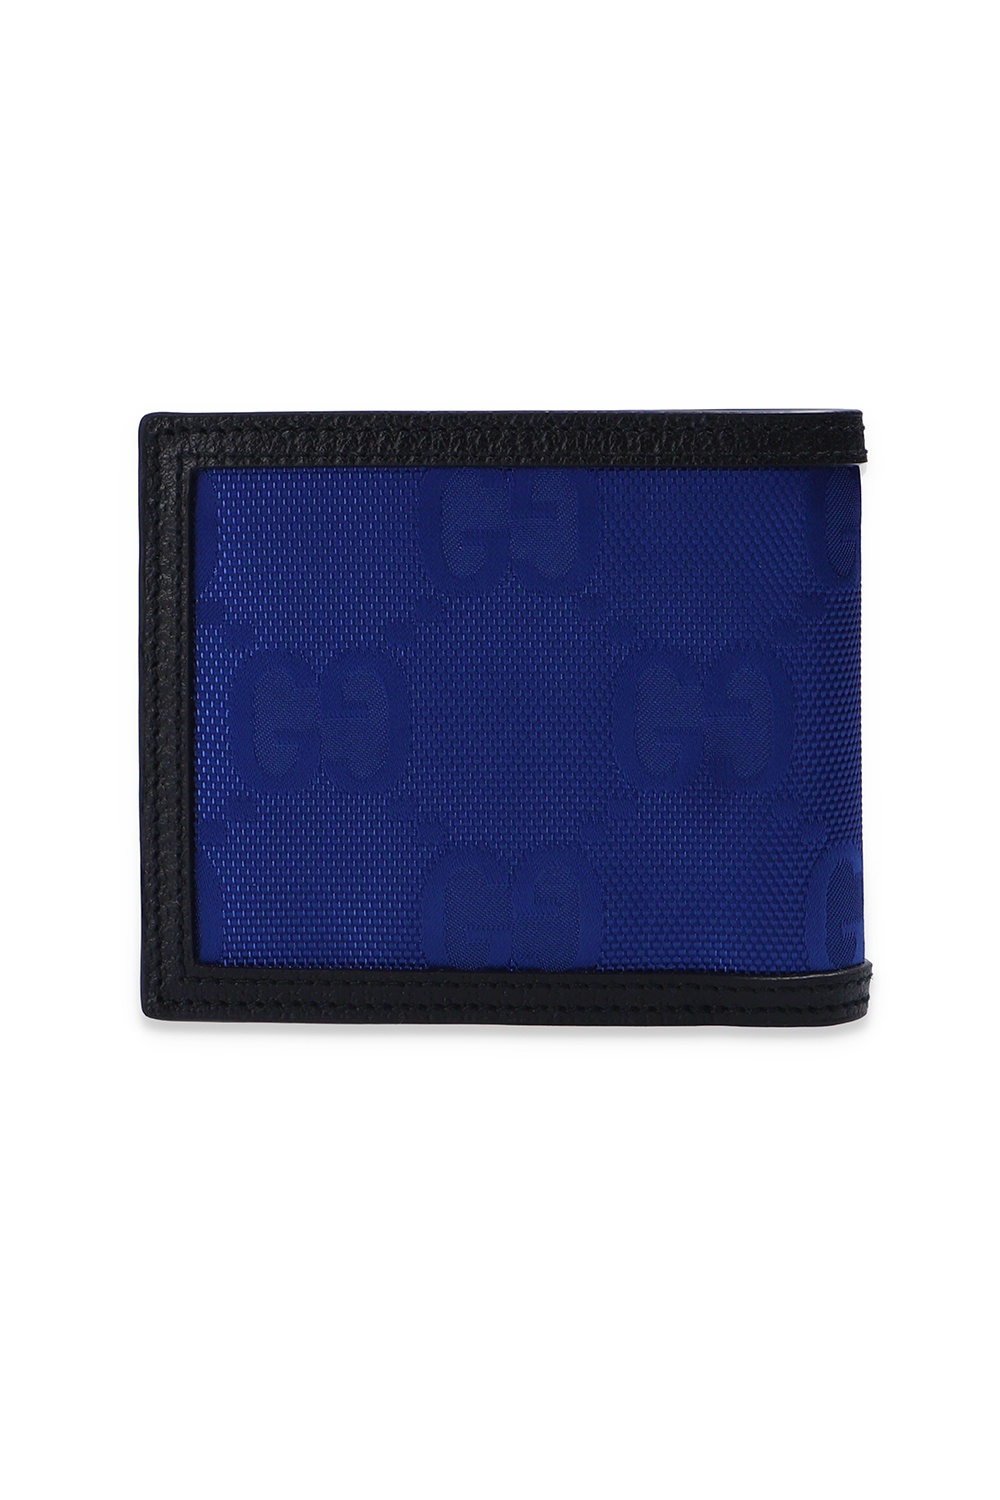 Gucci Bifold wallet with logo